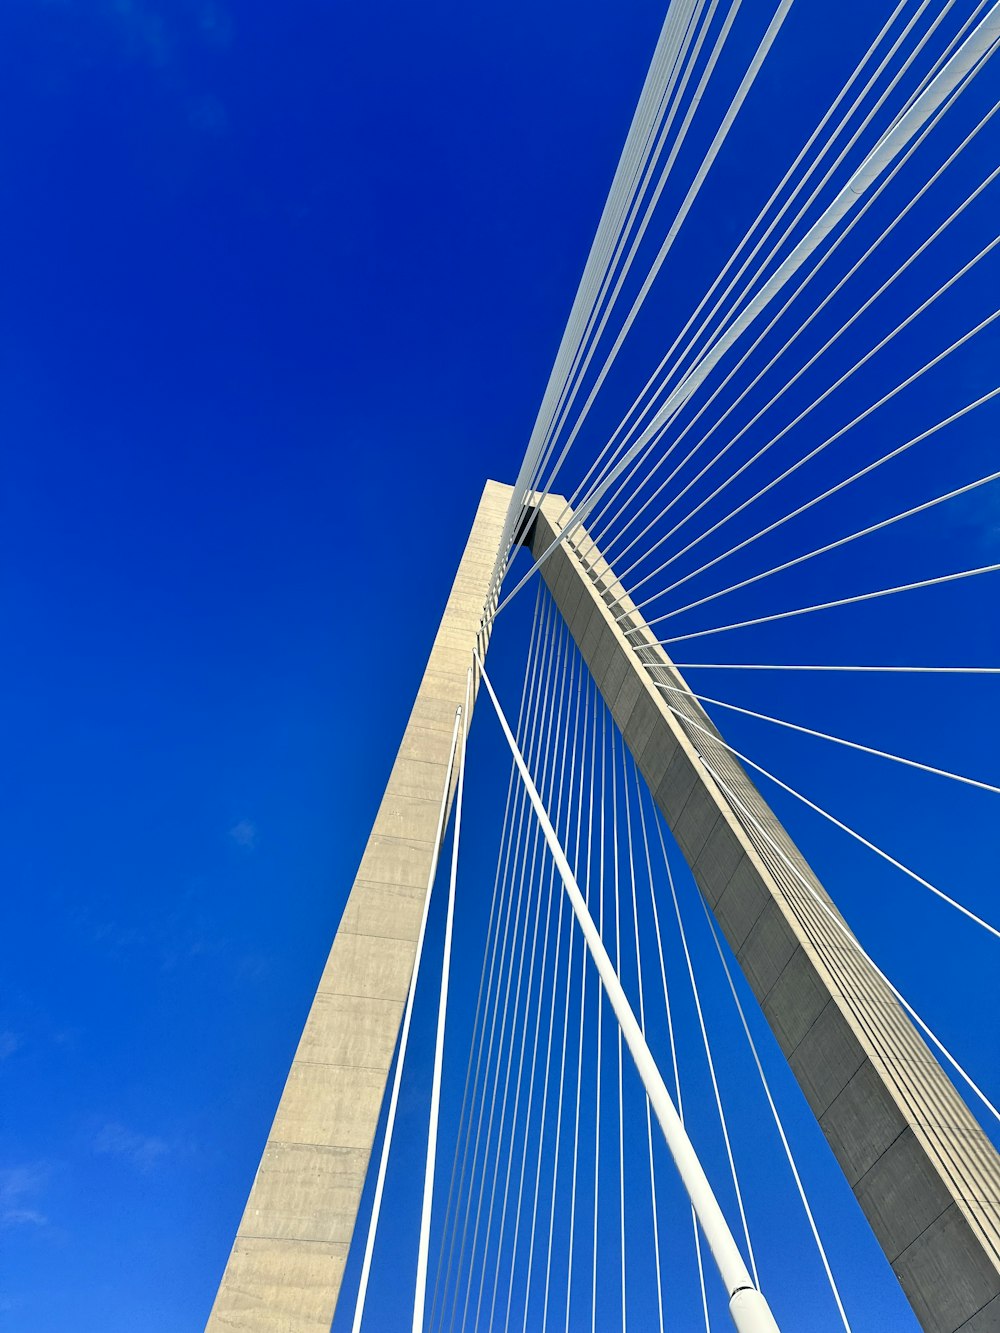 a very tall bridge with a blue sky in the background